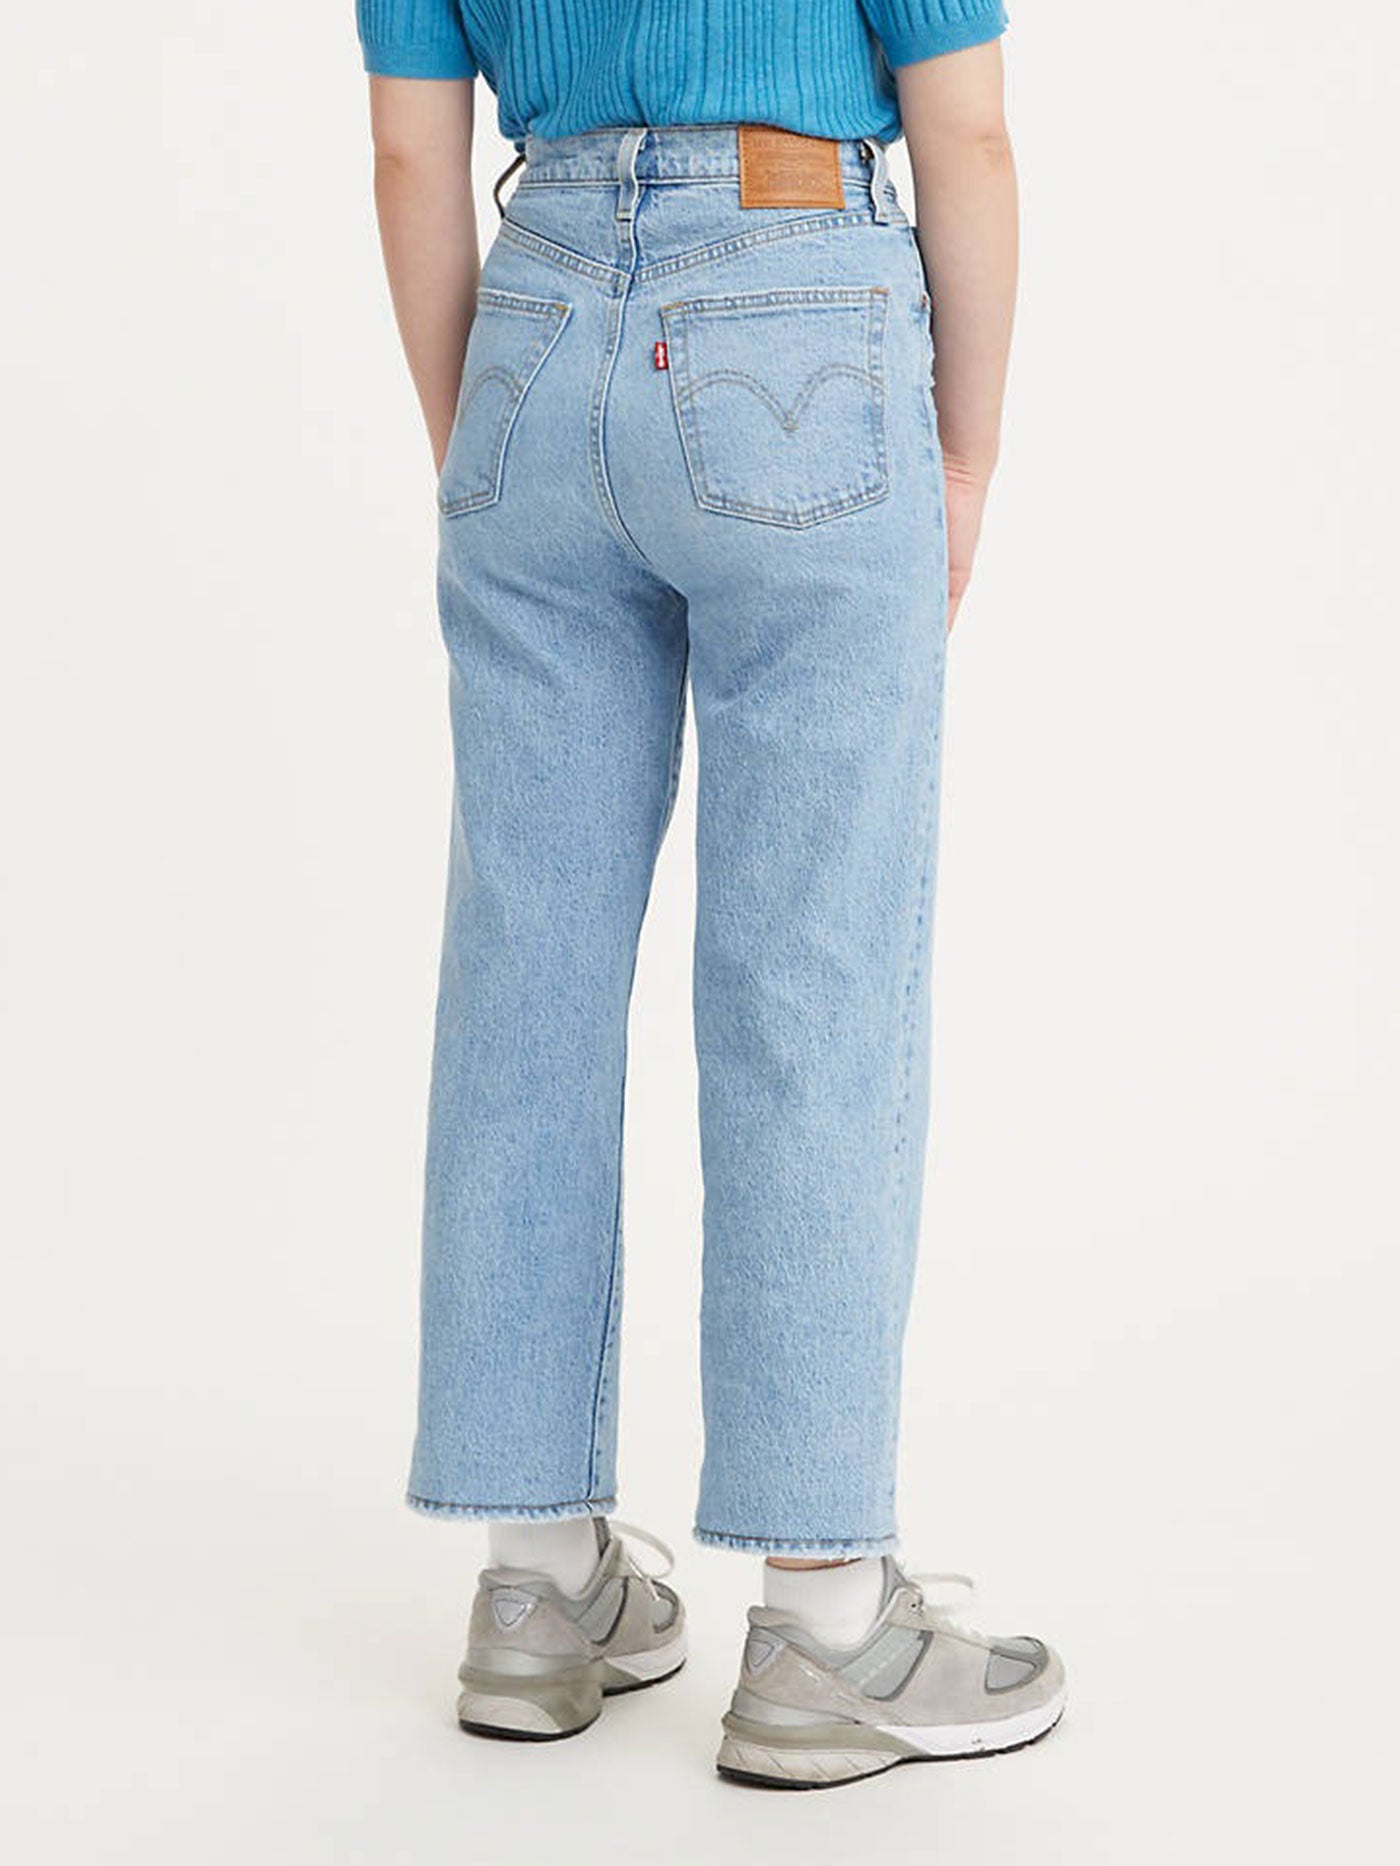 Levis Ribcage Straight Ankle Jeans | EMPIRE